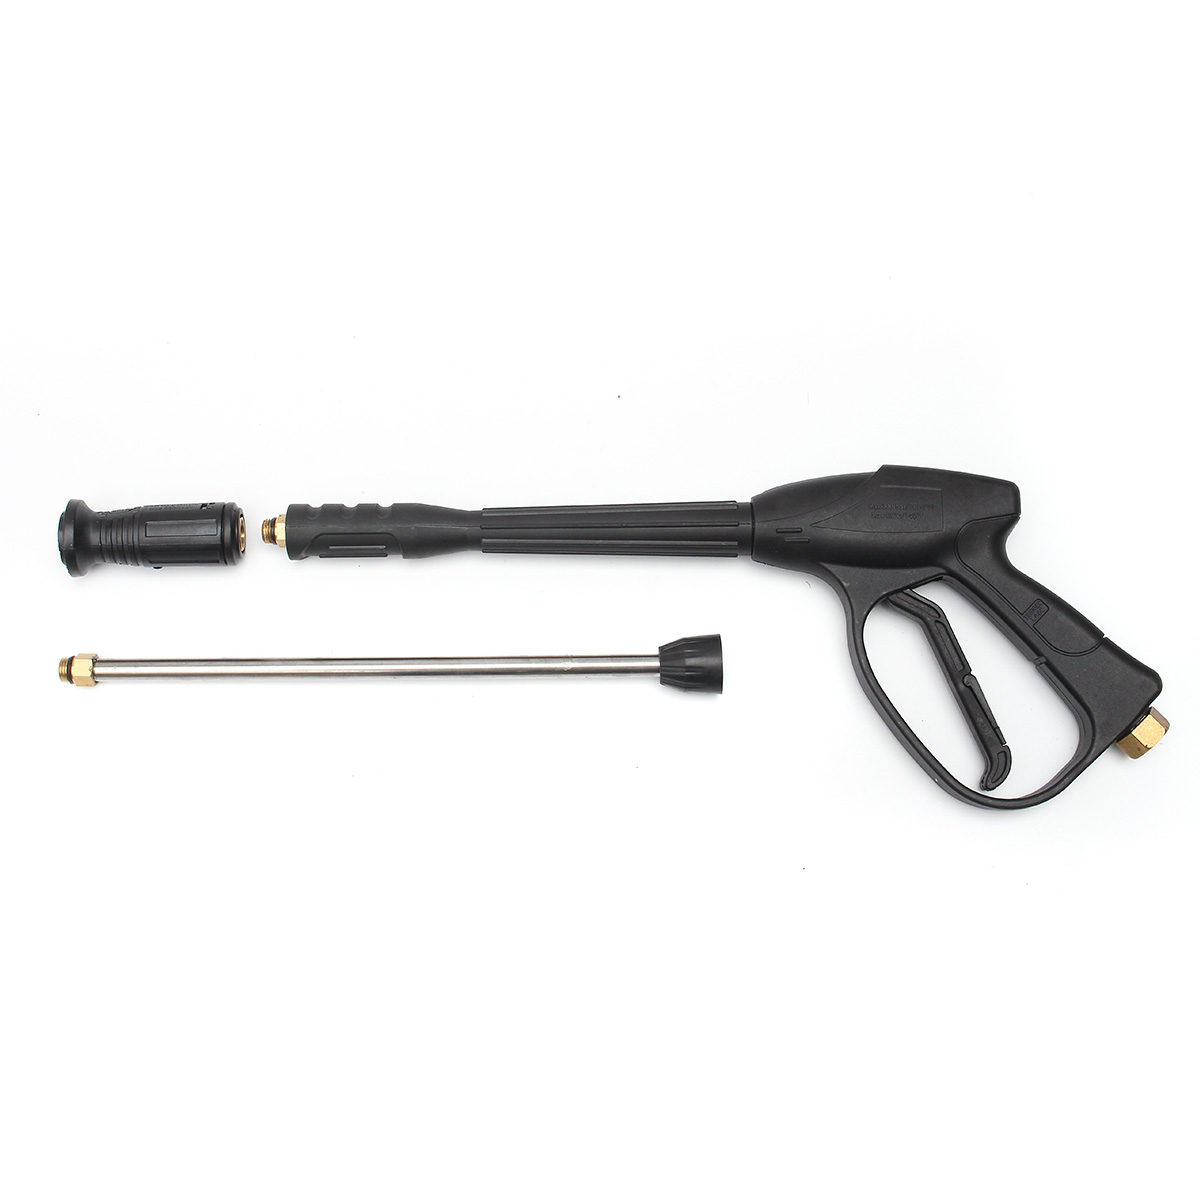 High-Pressure-Washer-Spray-Nozzle-Home-Water-Gun-With-Extension-Rod-1170153-5